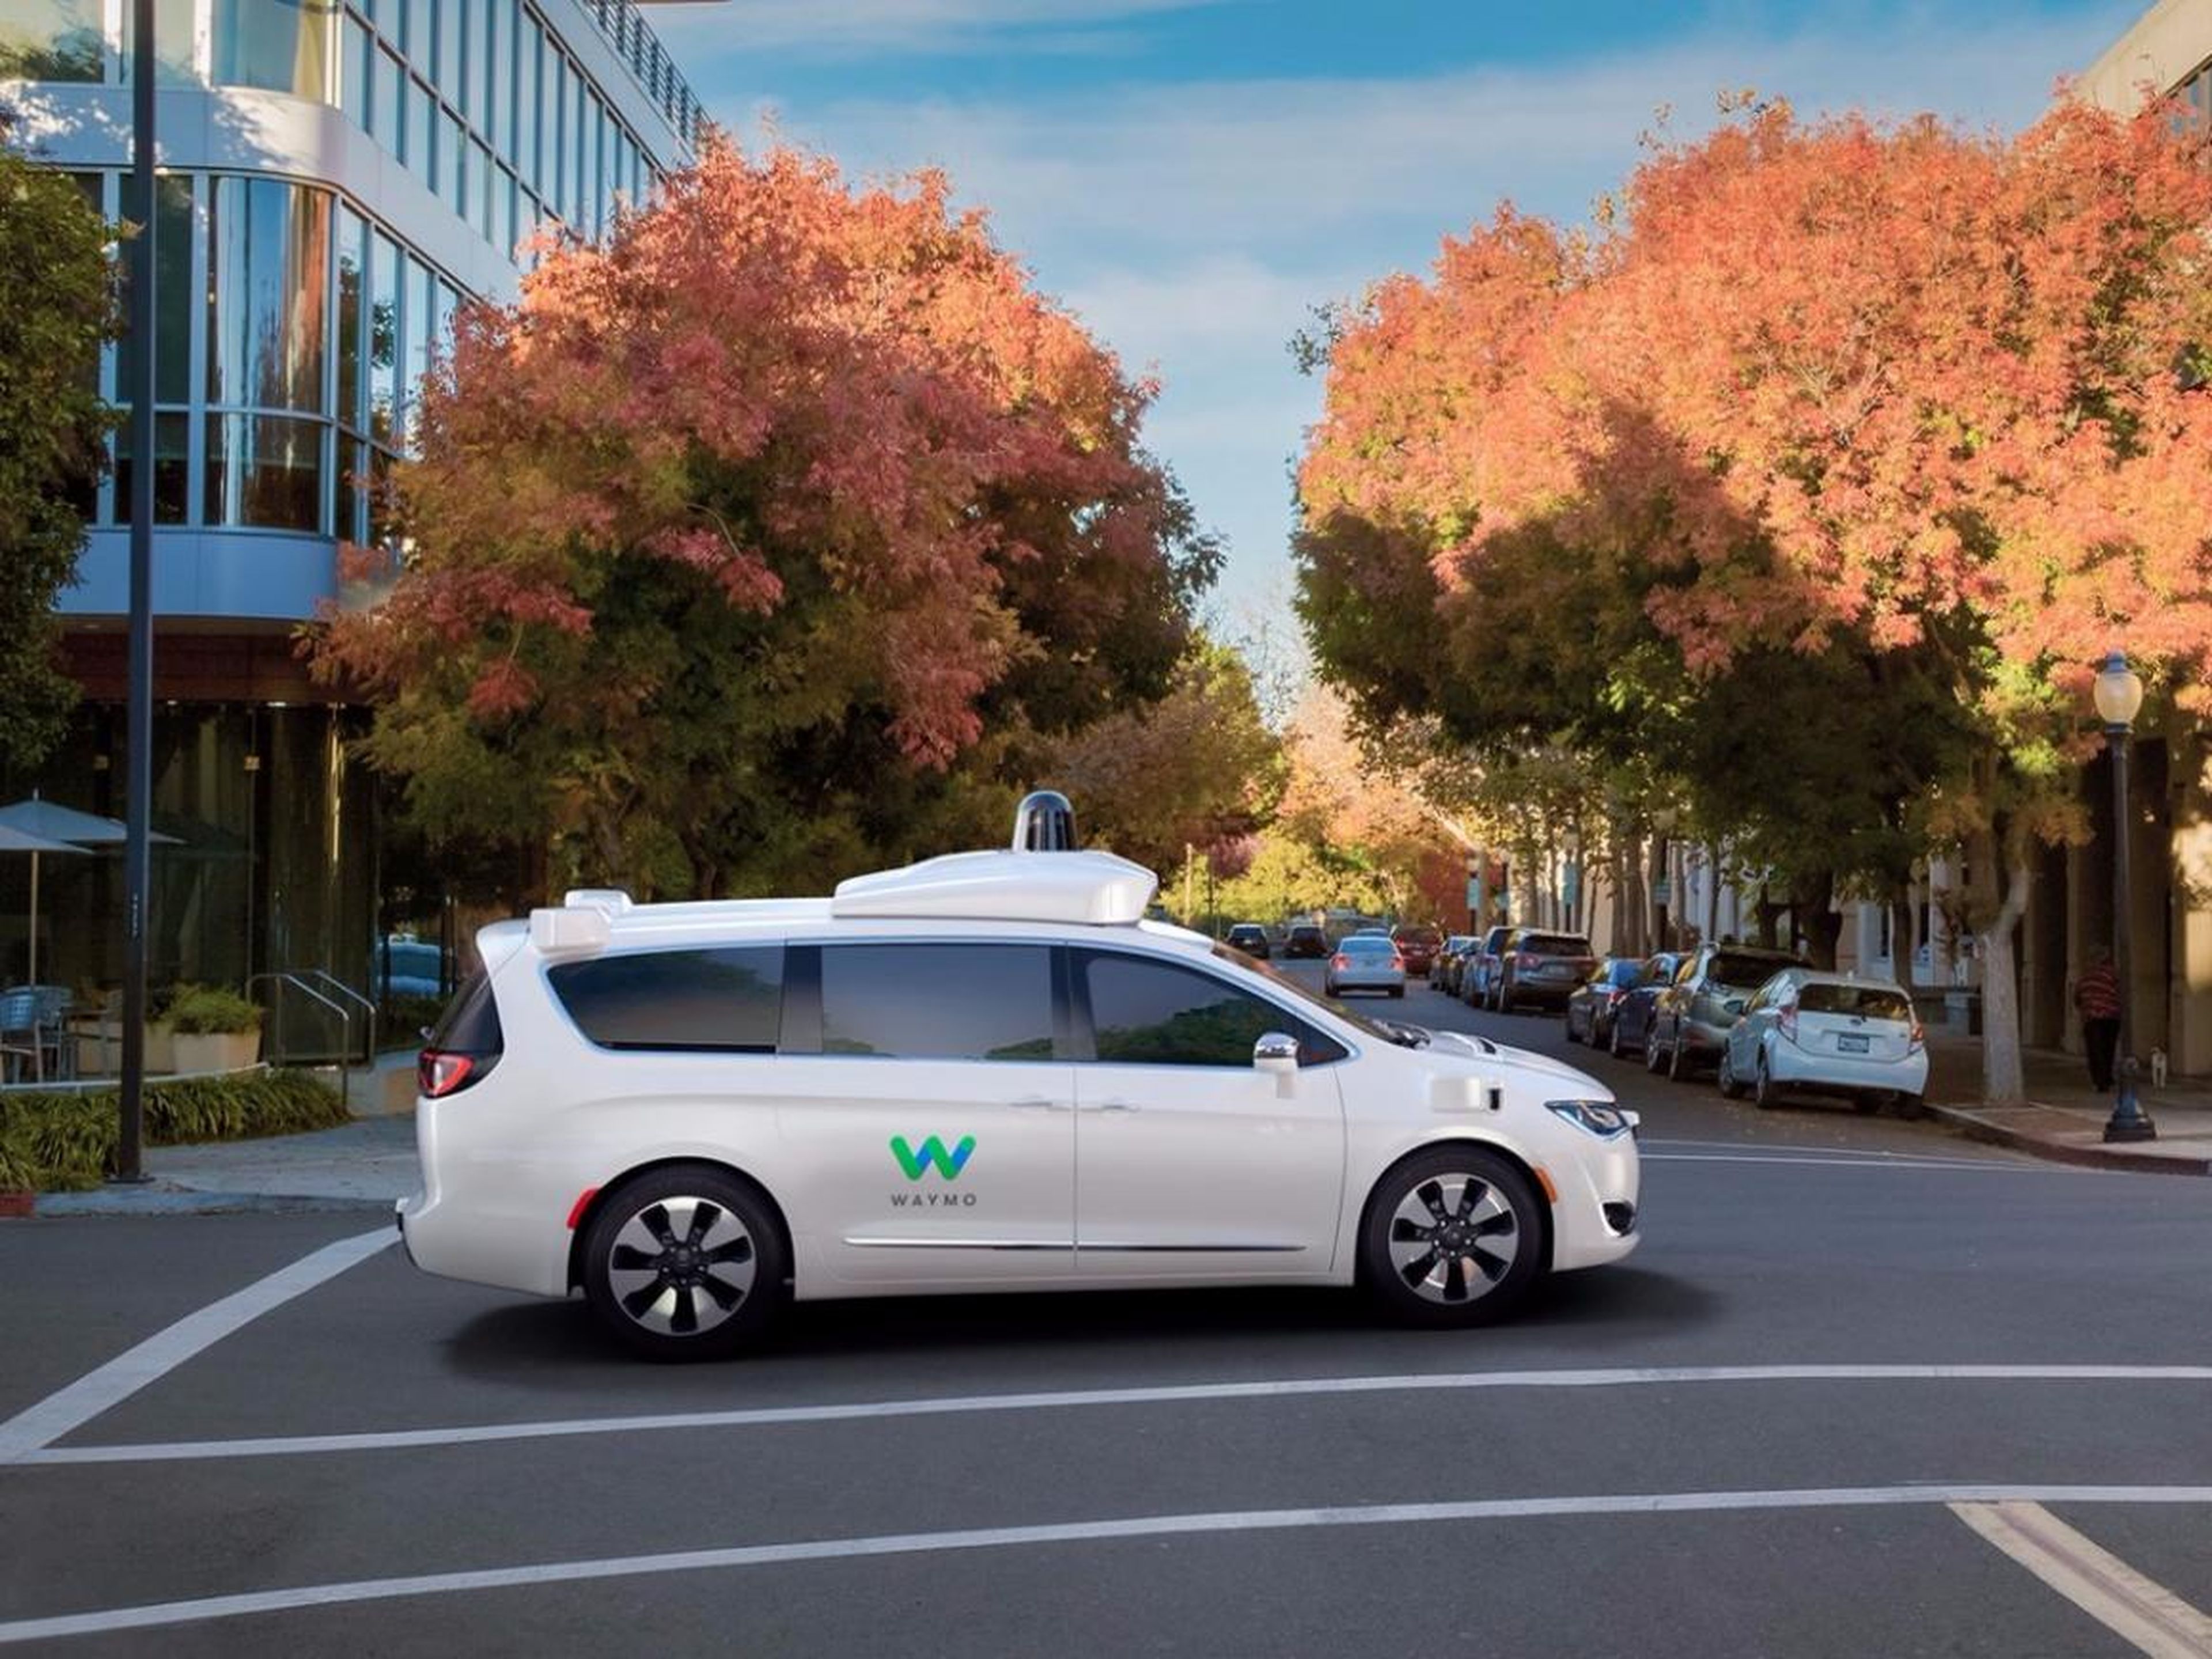 Waymo, which stands for "Way forward in mobility," has the mission of making "it safe and easy for people and things to move around." The cars have now driven two million miles, but have not yet become available for commercial use